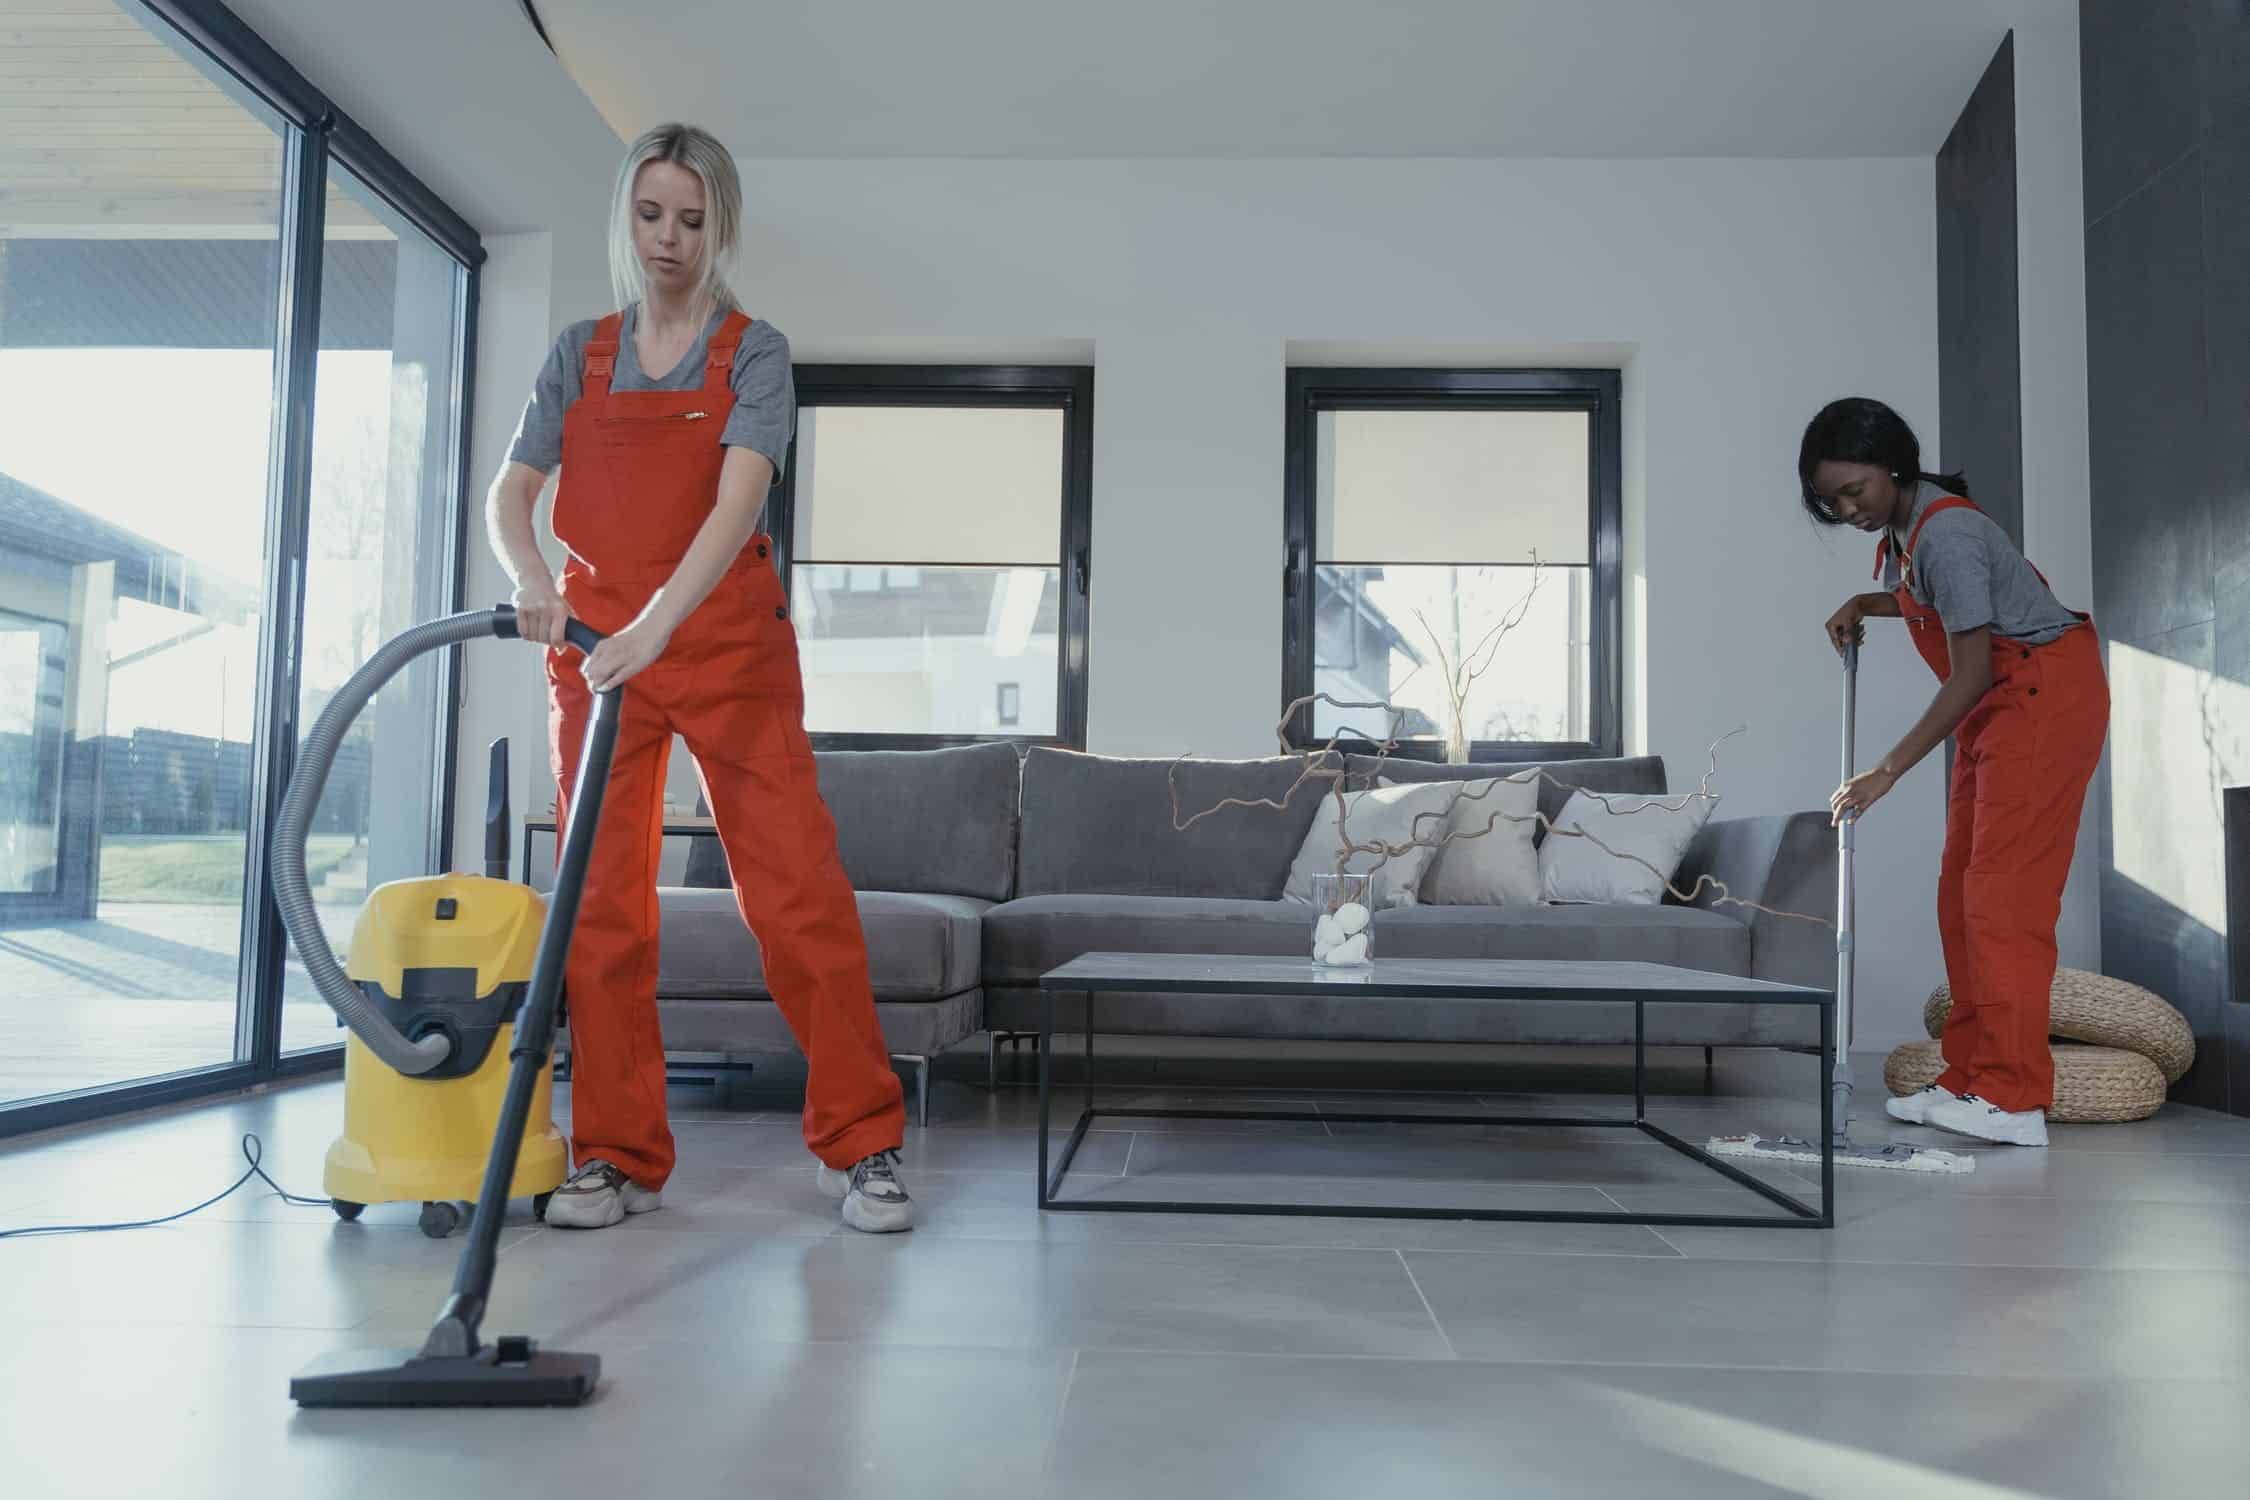 What Is Included In A Typical House Cleaning Service? - Anita's